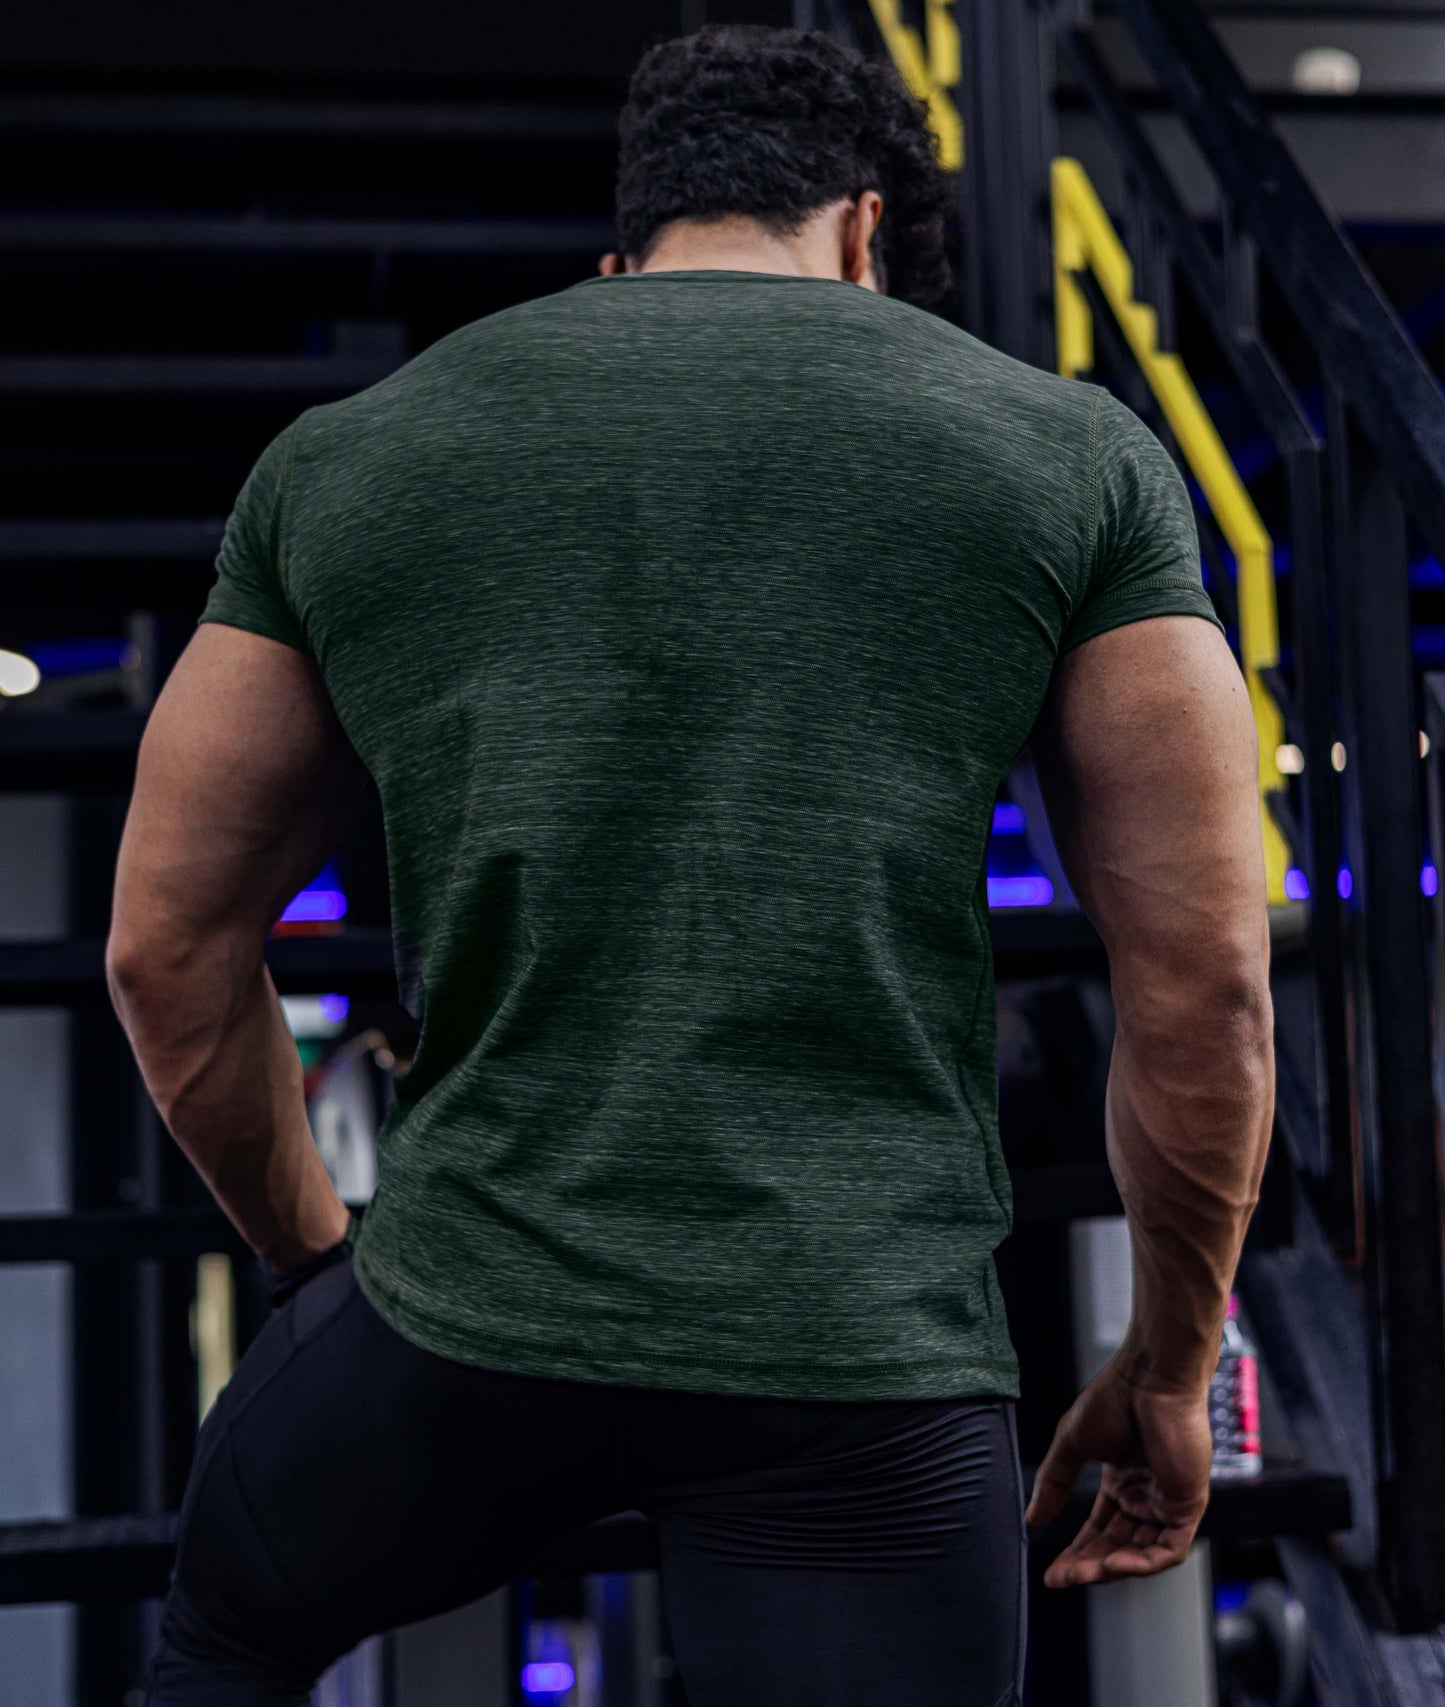 Forest Green Pro Athlete GymX Tee